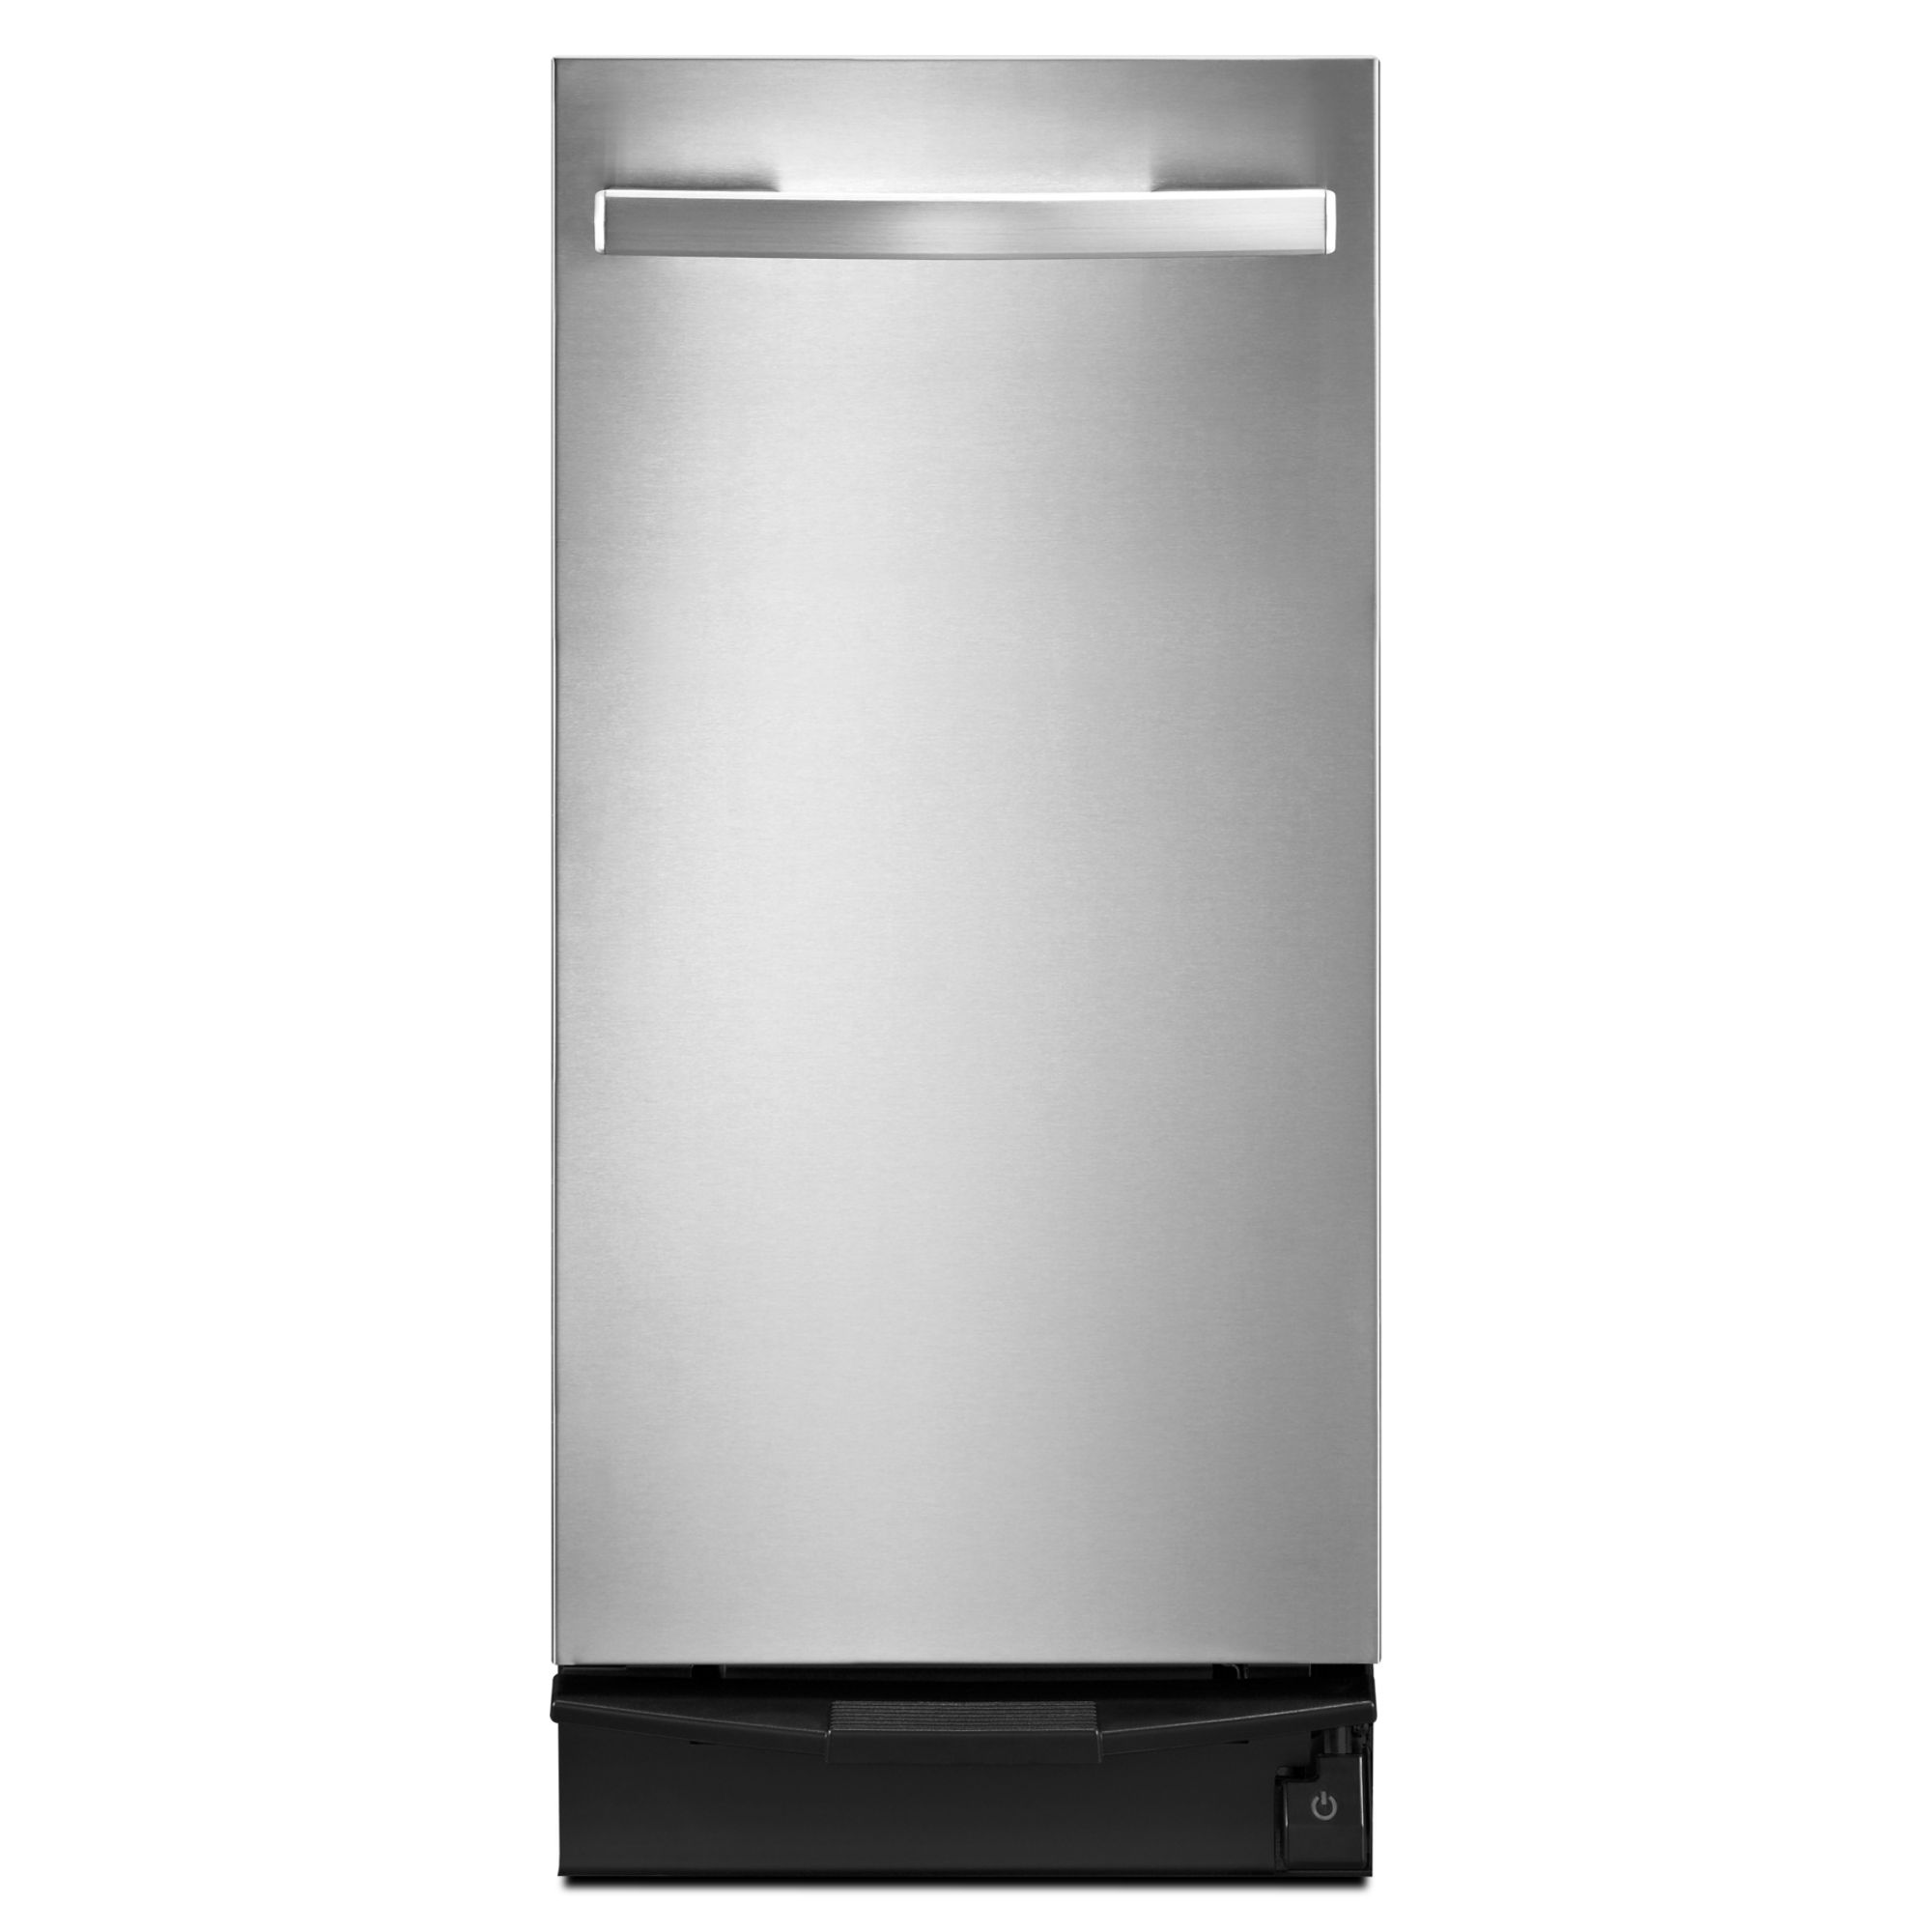 Whirlpool 15 Undercounter Trash Compactor - Stainless Steel